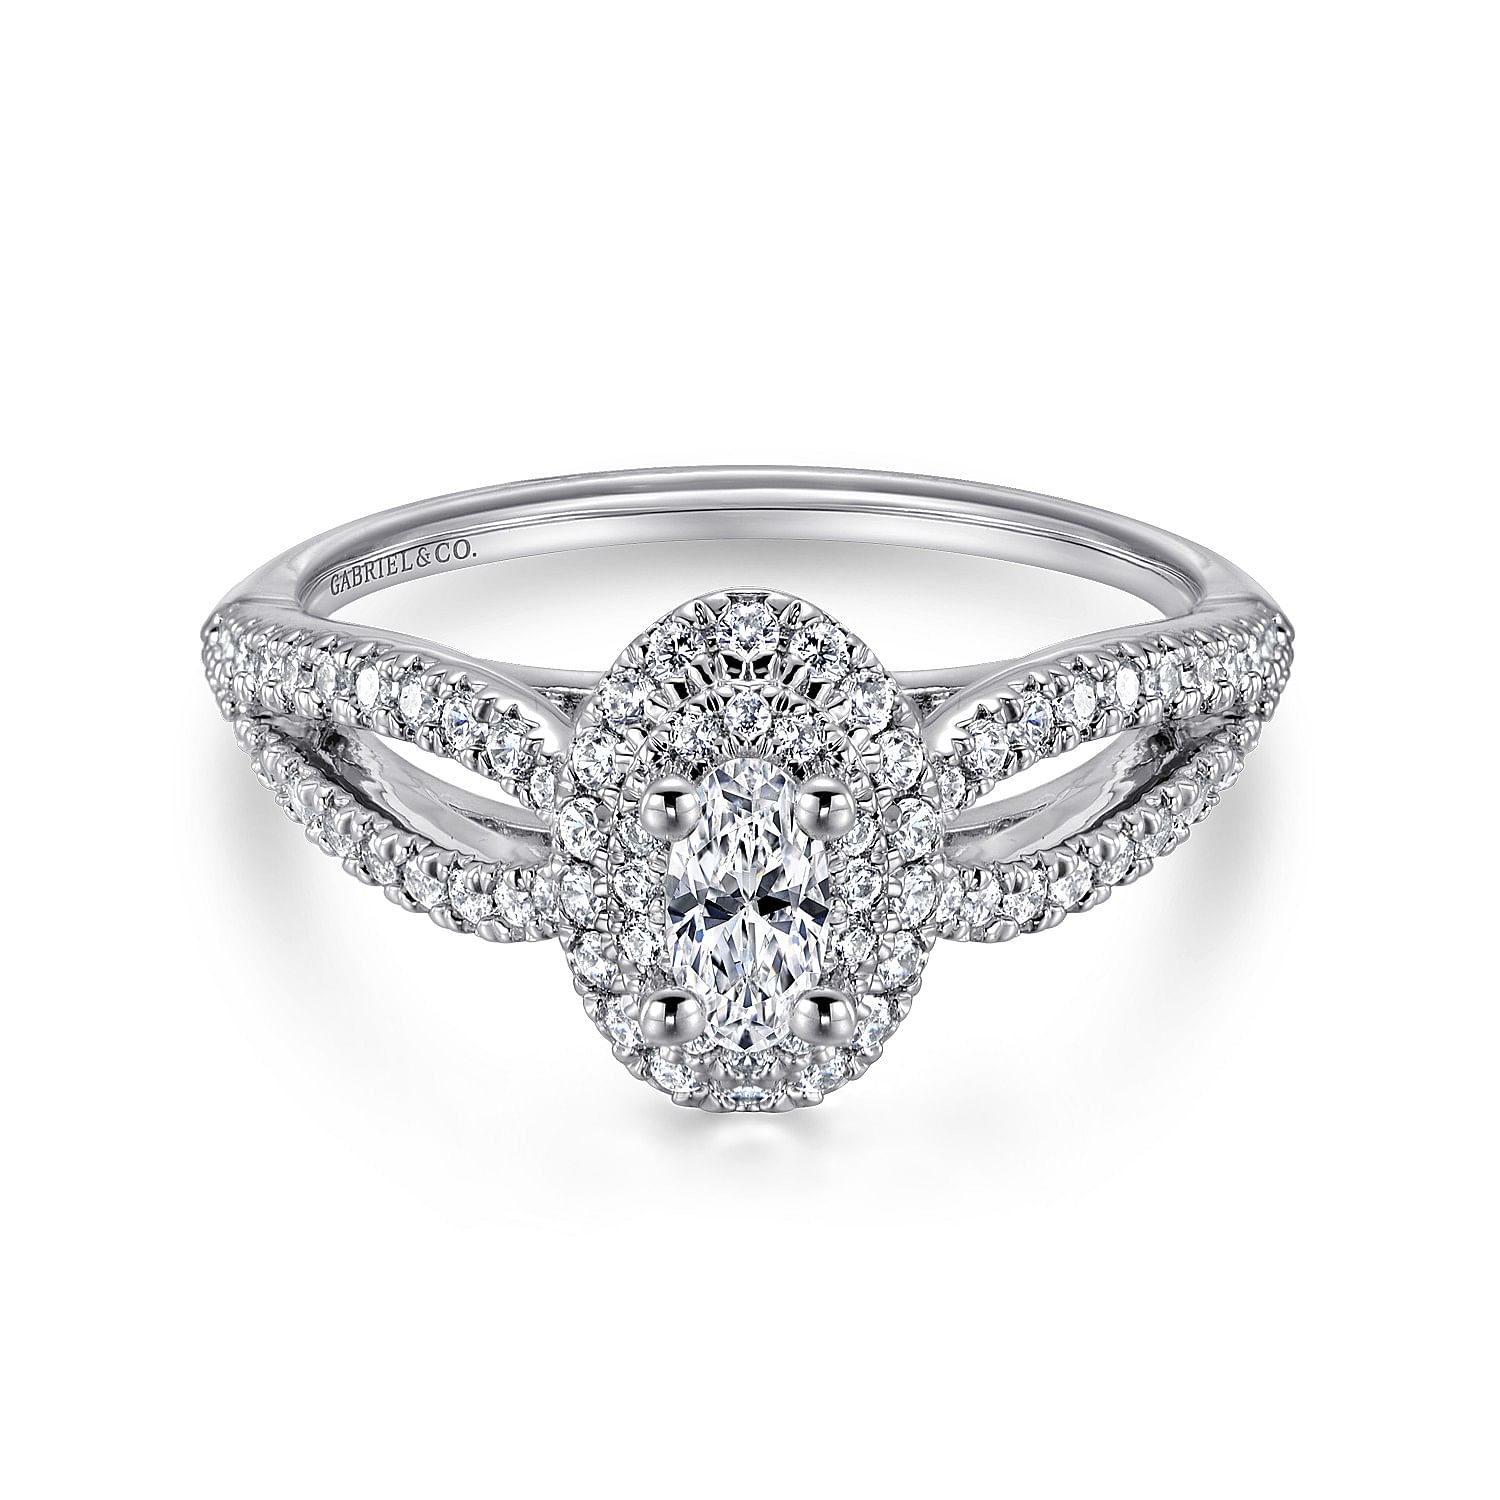 Clinton - 14K White Gold Oval Complete Diamond Engagement Ring